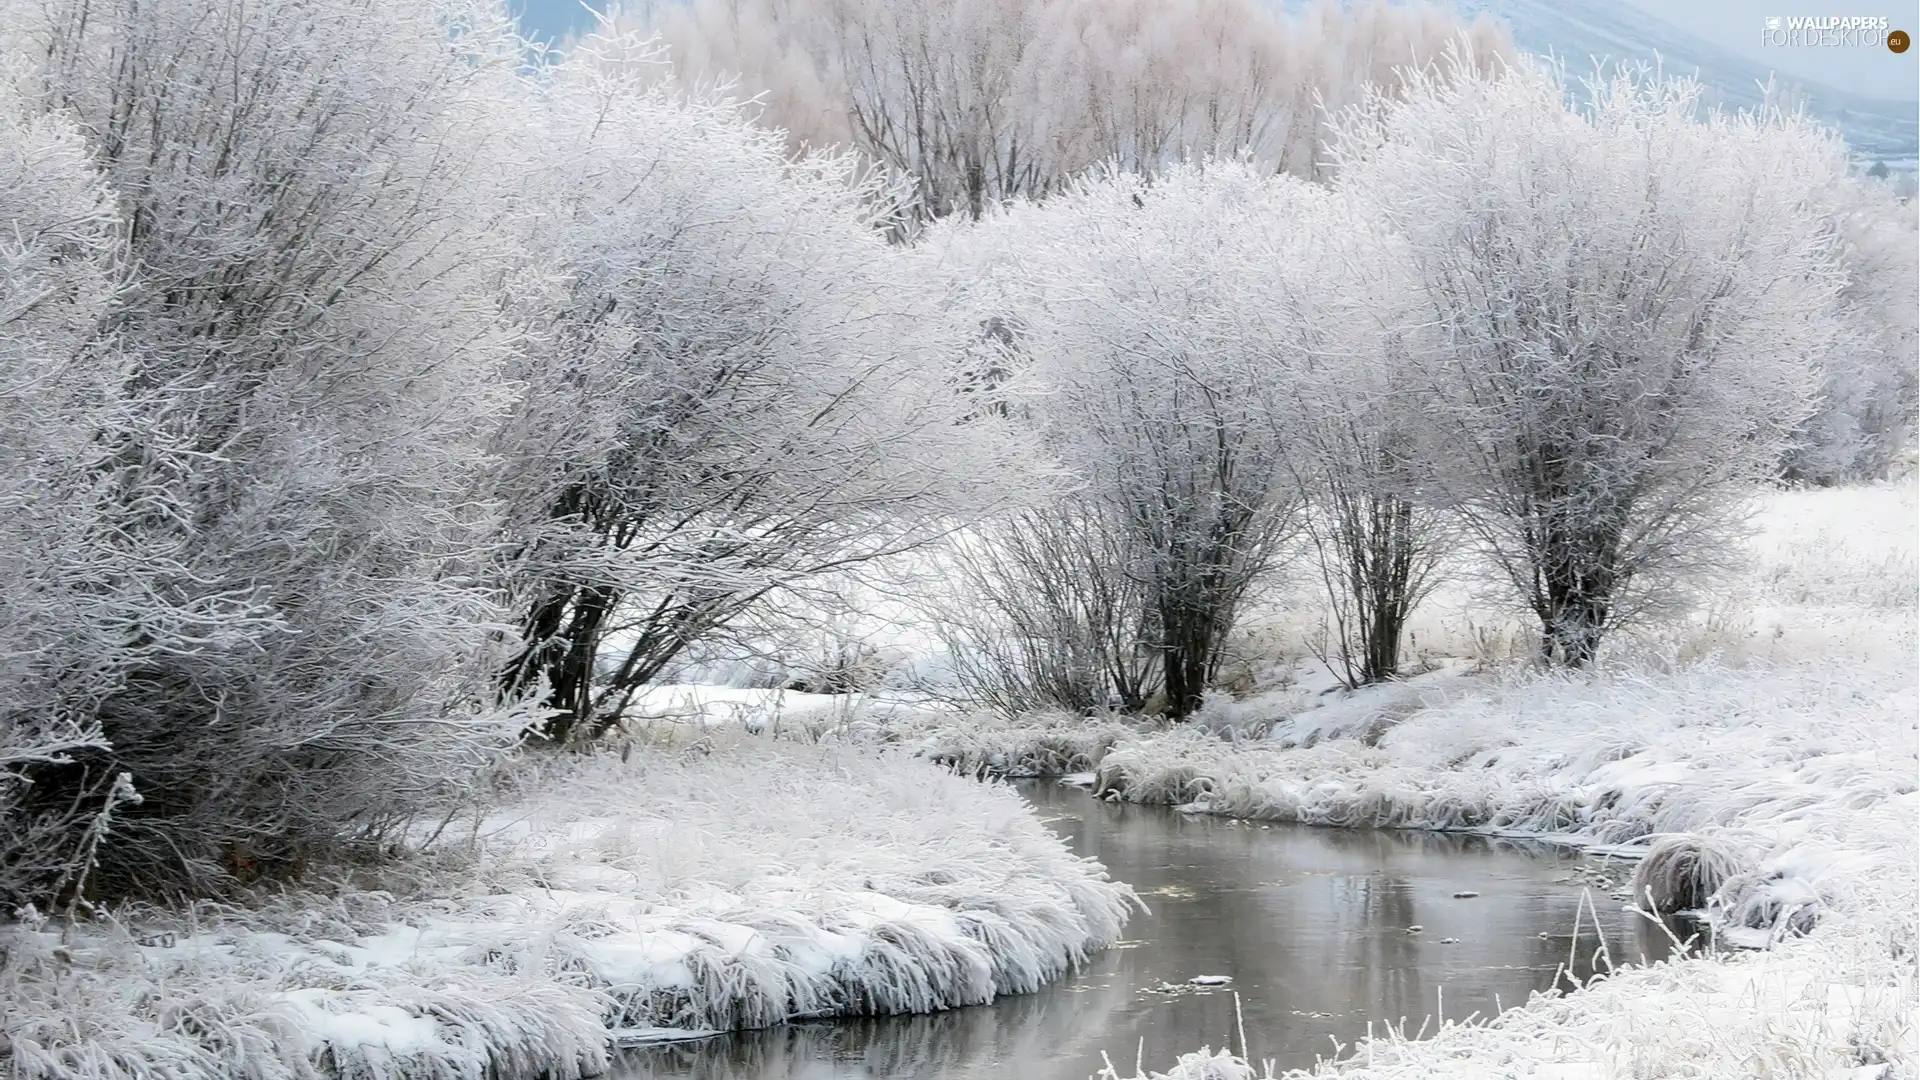 viewes, White frost, River, trees, winter